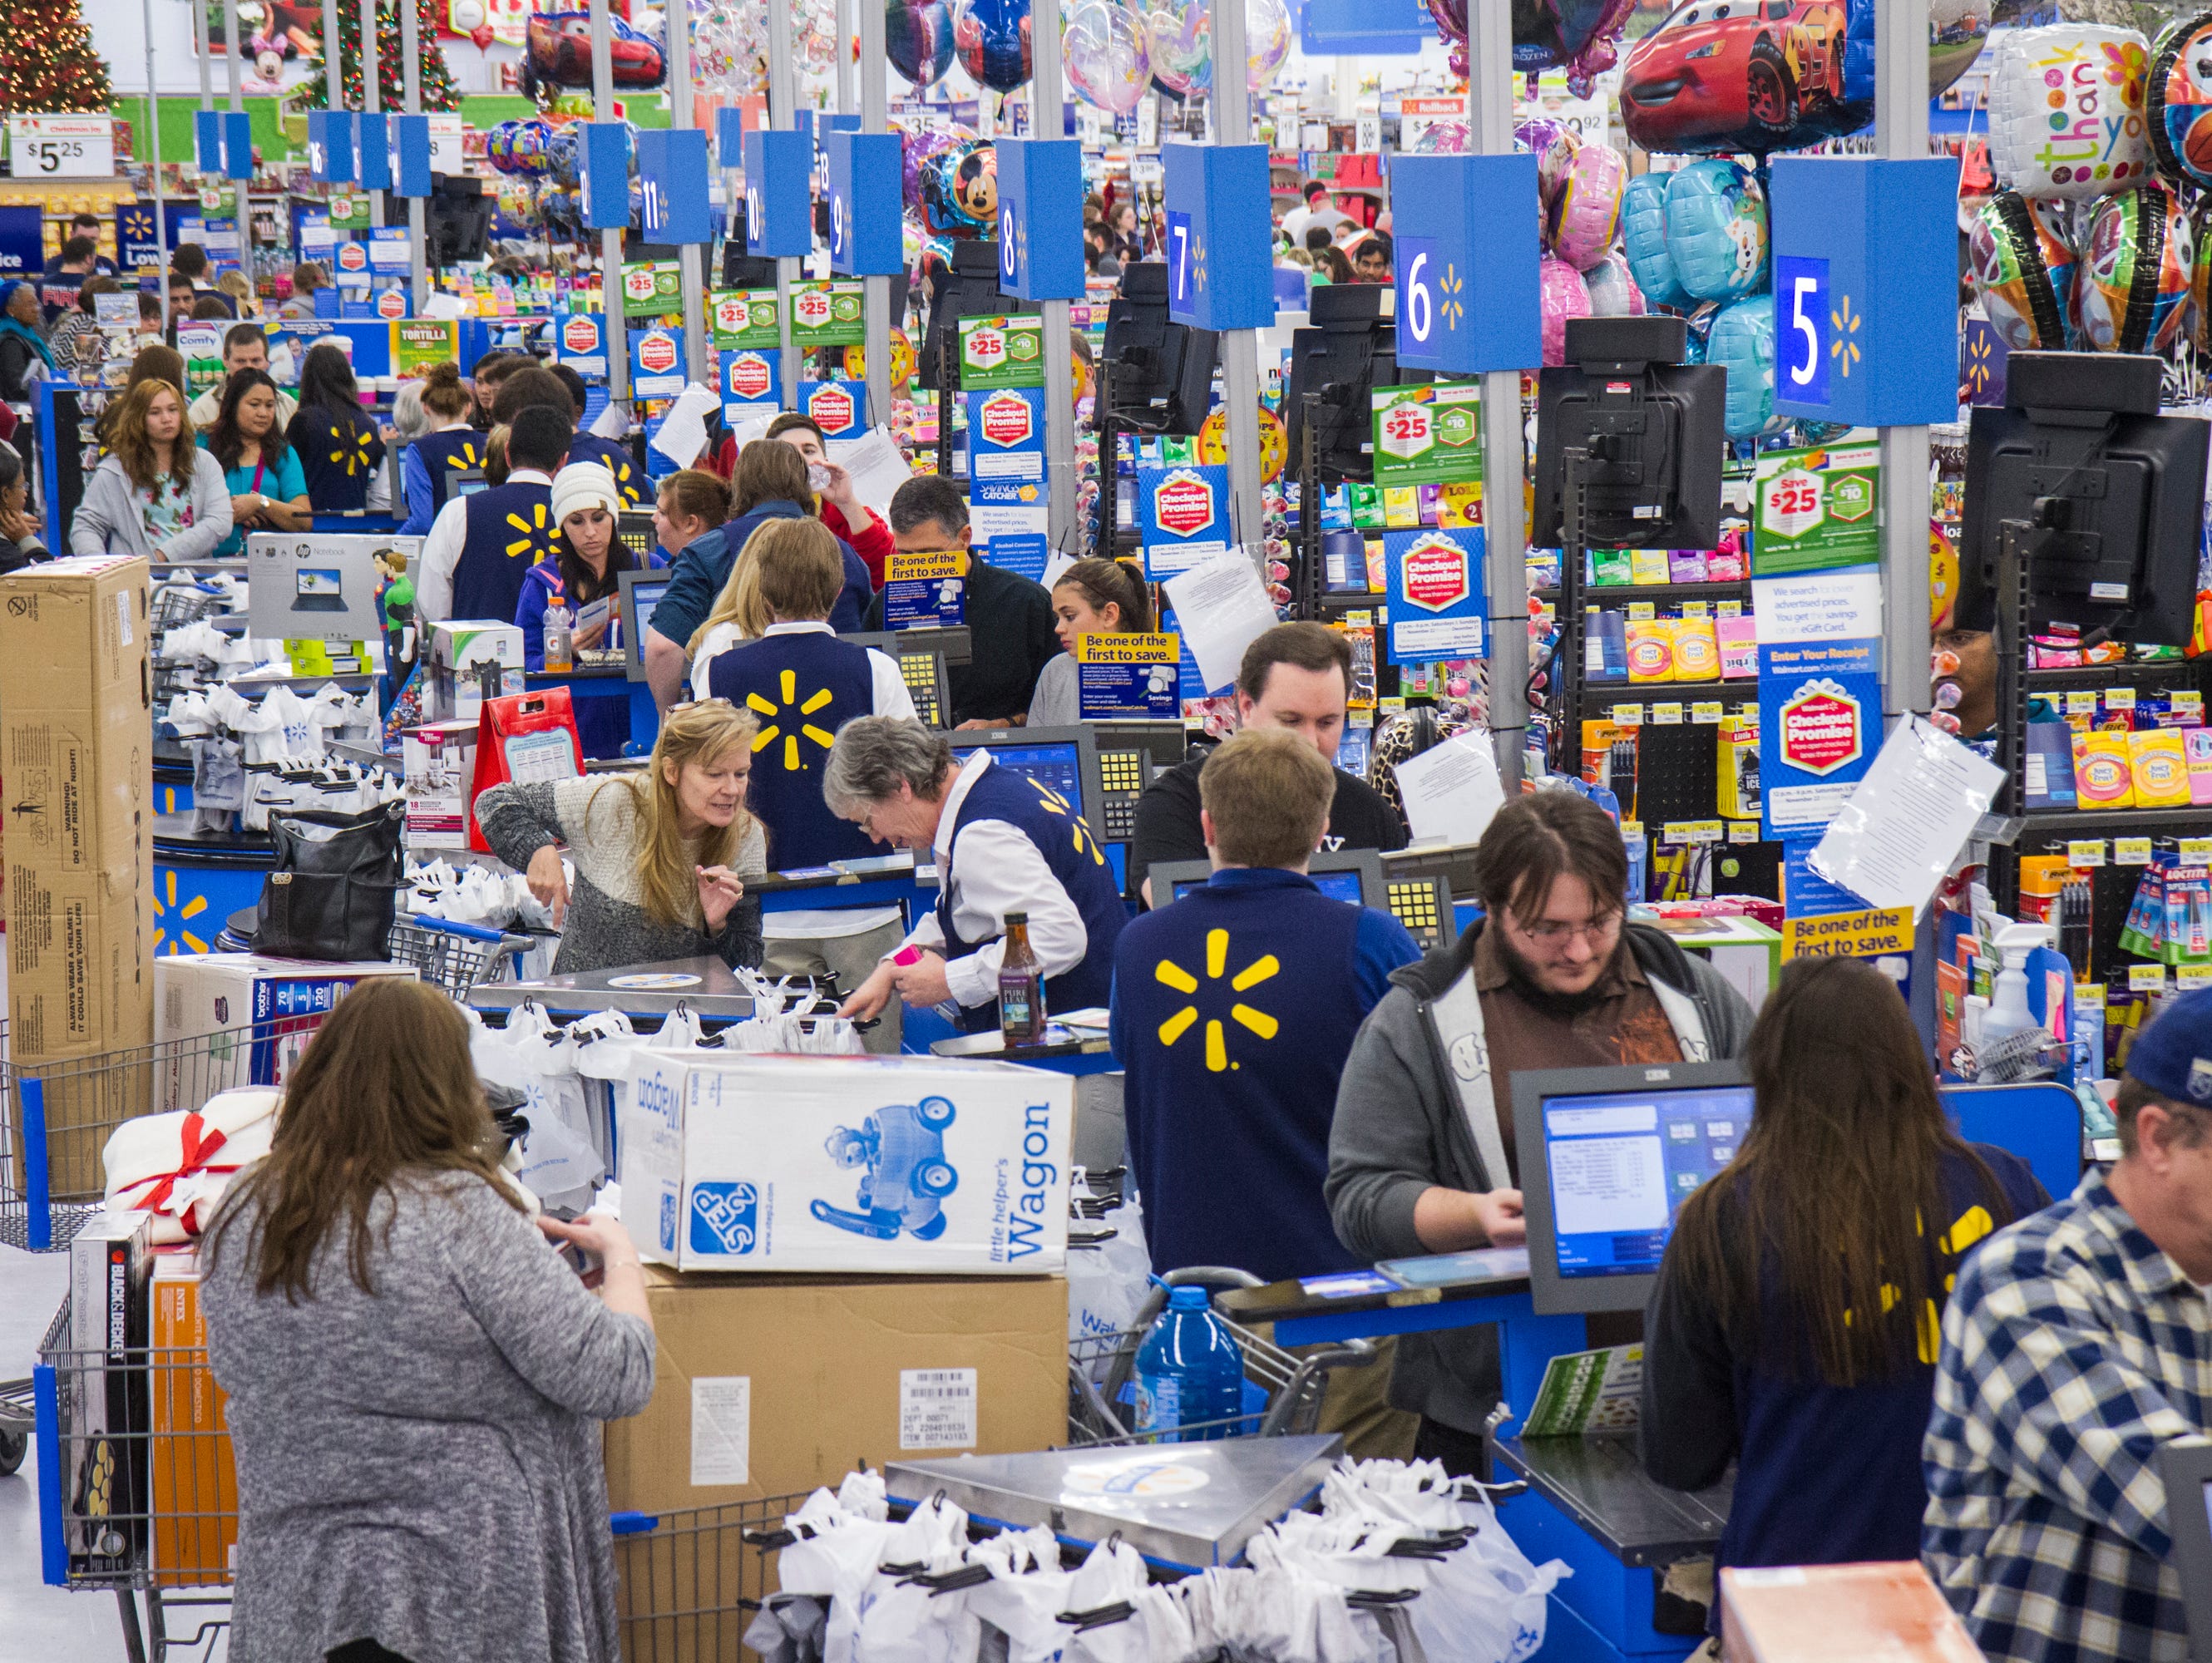 Customers wrap up their holiday shopping during Walmart's Black Friday event Nov. 27, 2014, in Bentonville, Ark.